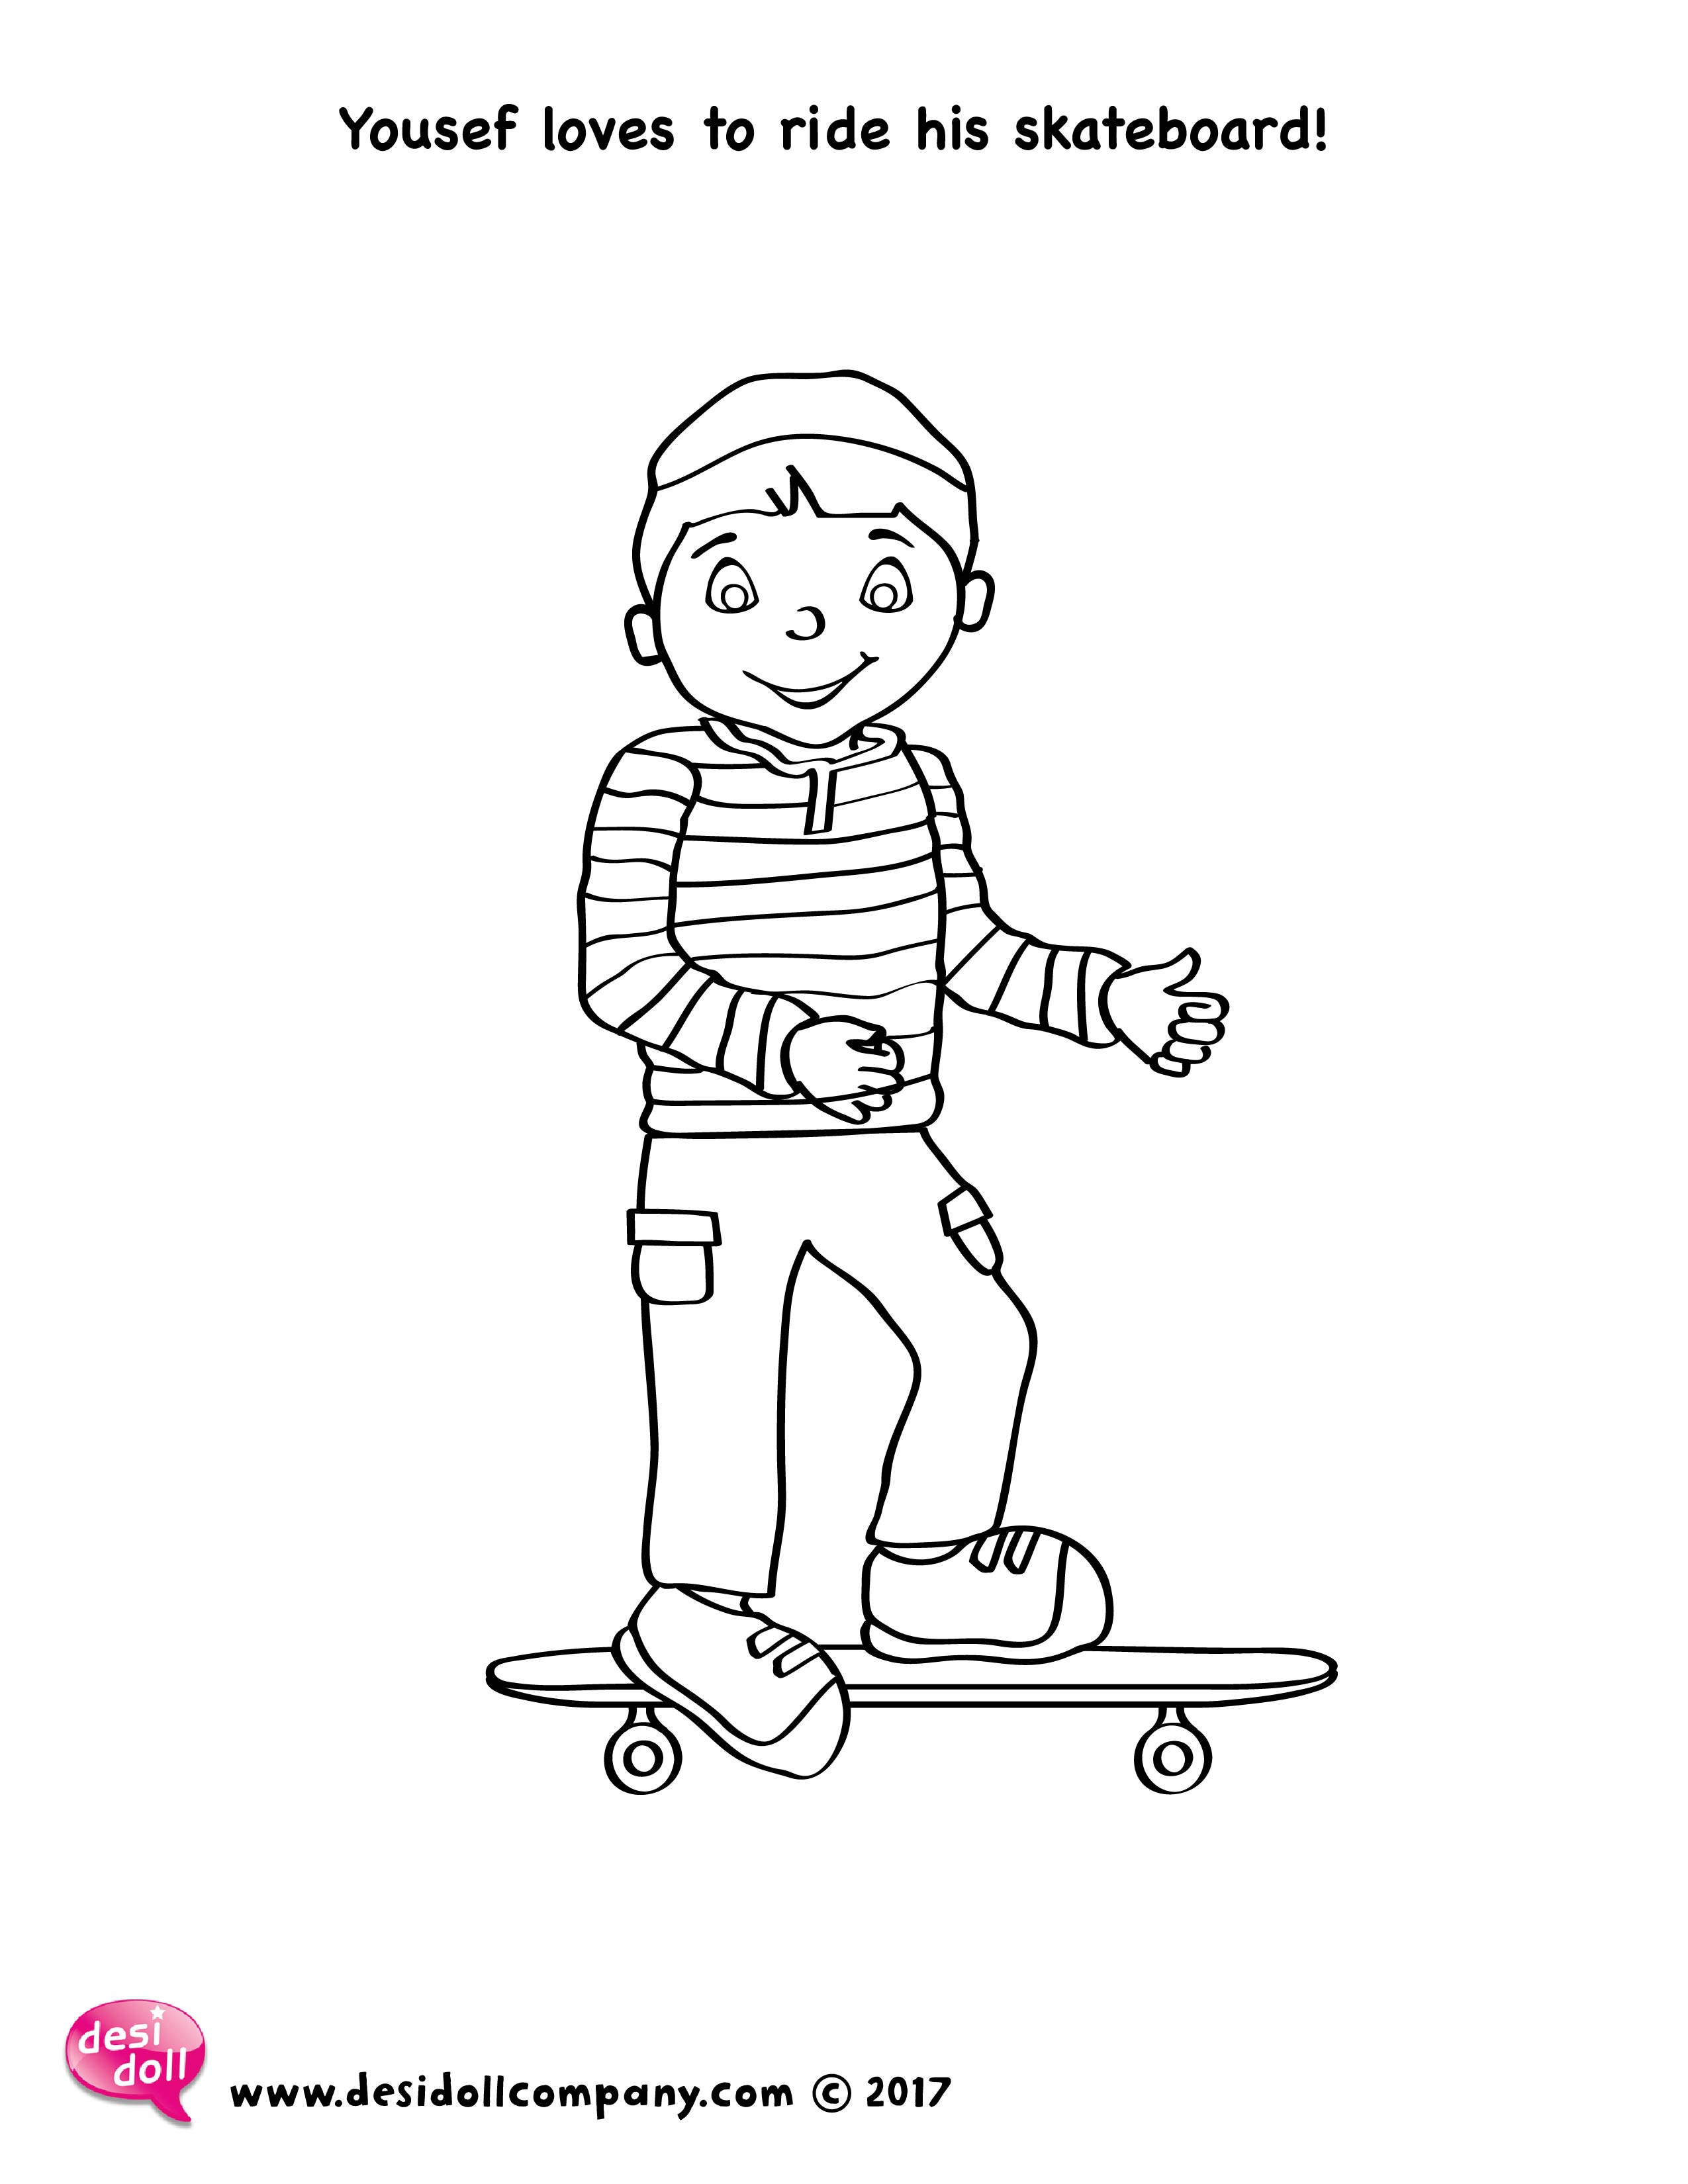 Yousuf loves to ride his skateboard!